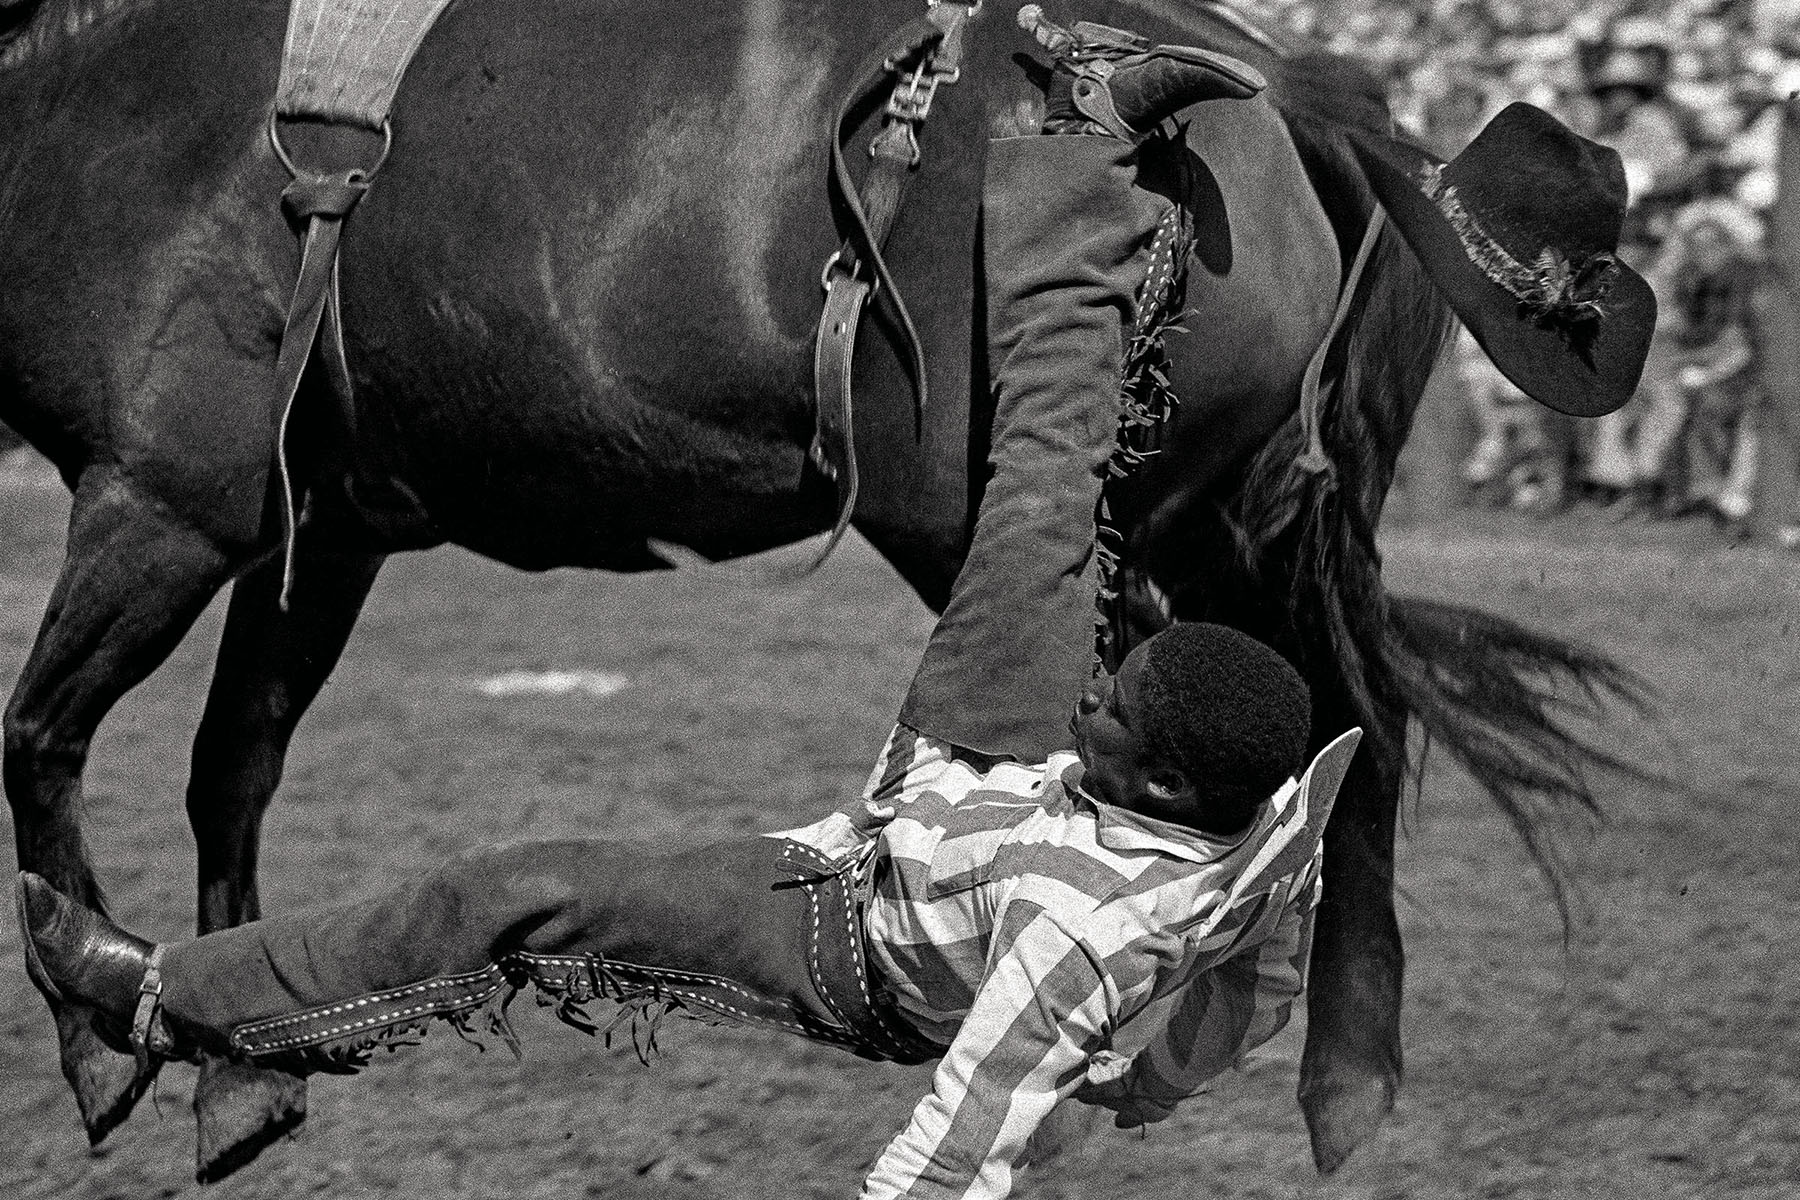 A man falls off the side of a horse onto dirt ground